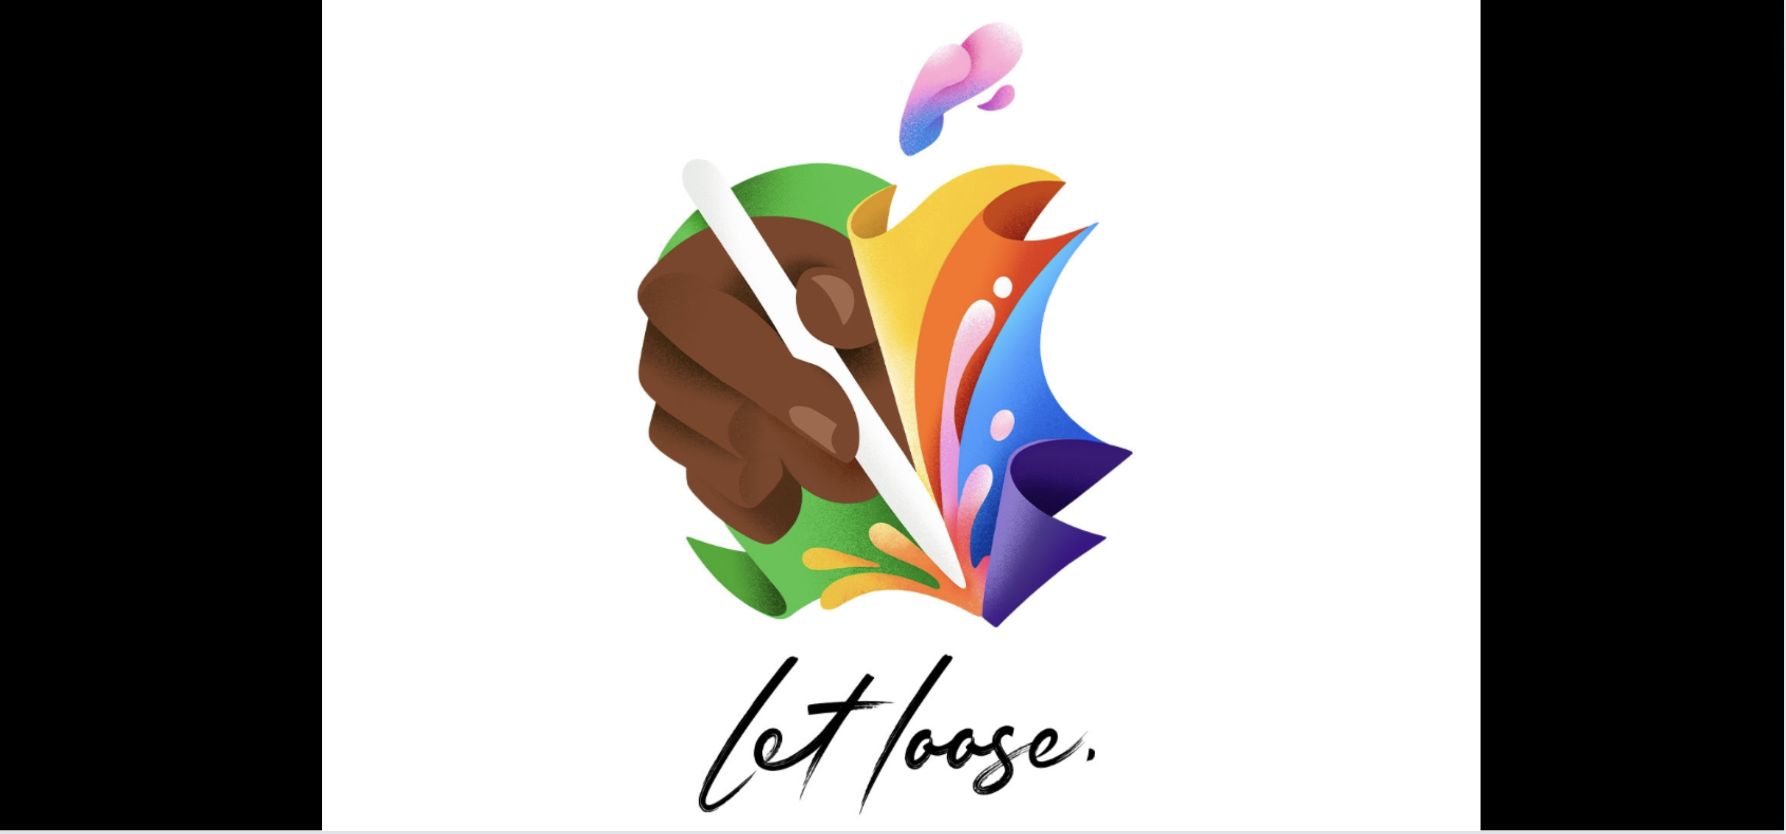 Apple Launches AI-Powered iPads With These Stunning Features During Let Loose Event